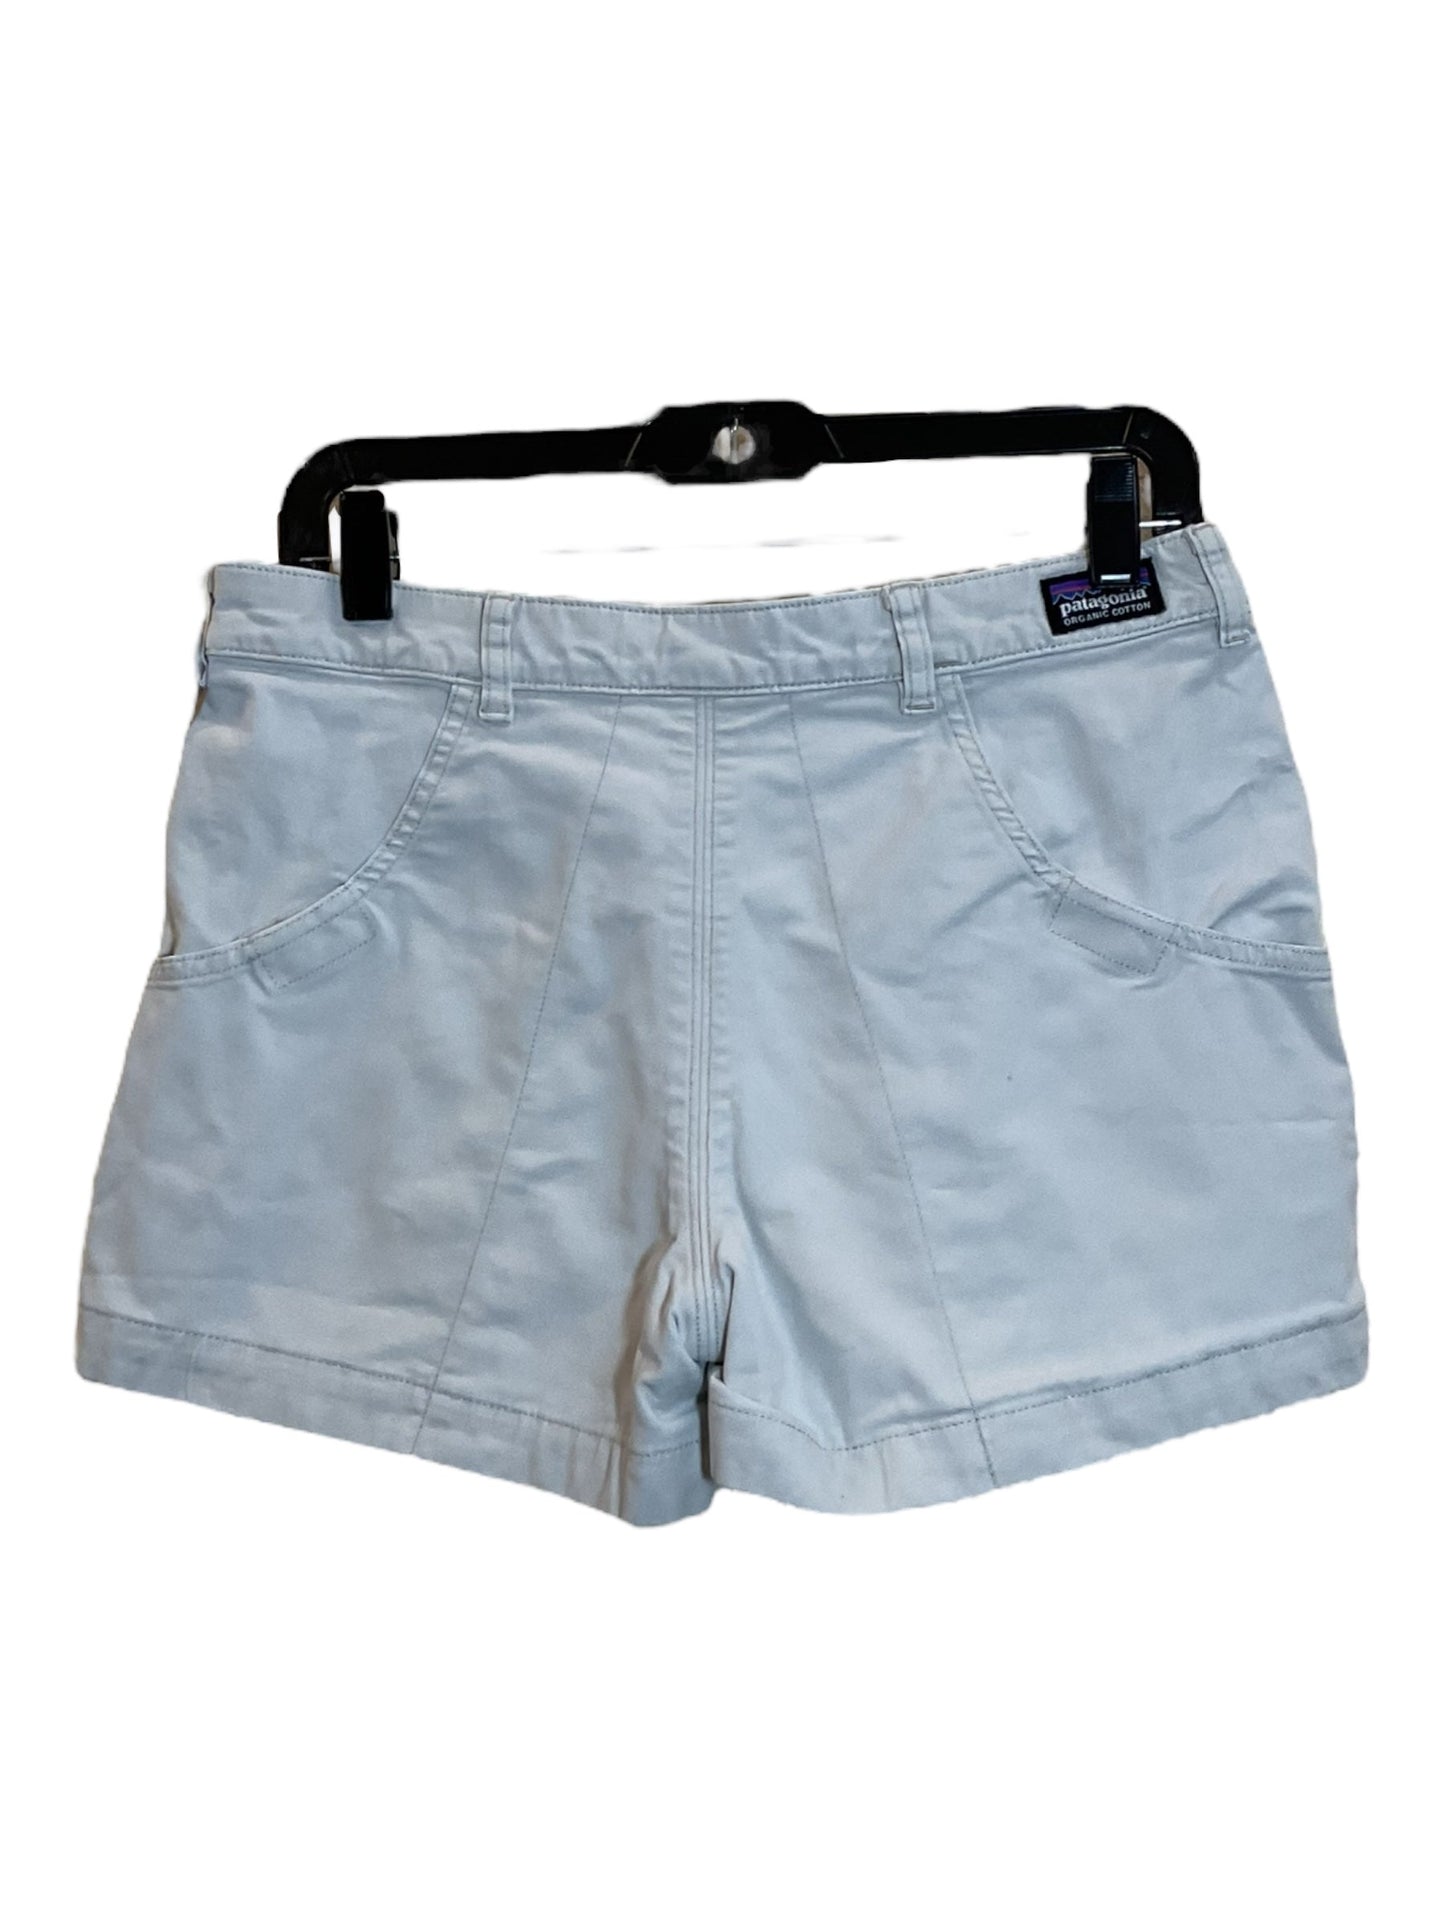 Shorts By Patagonia  Size: 6